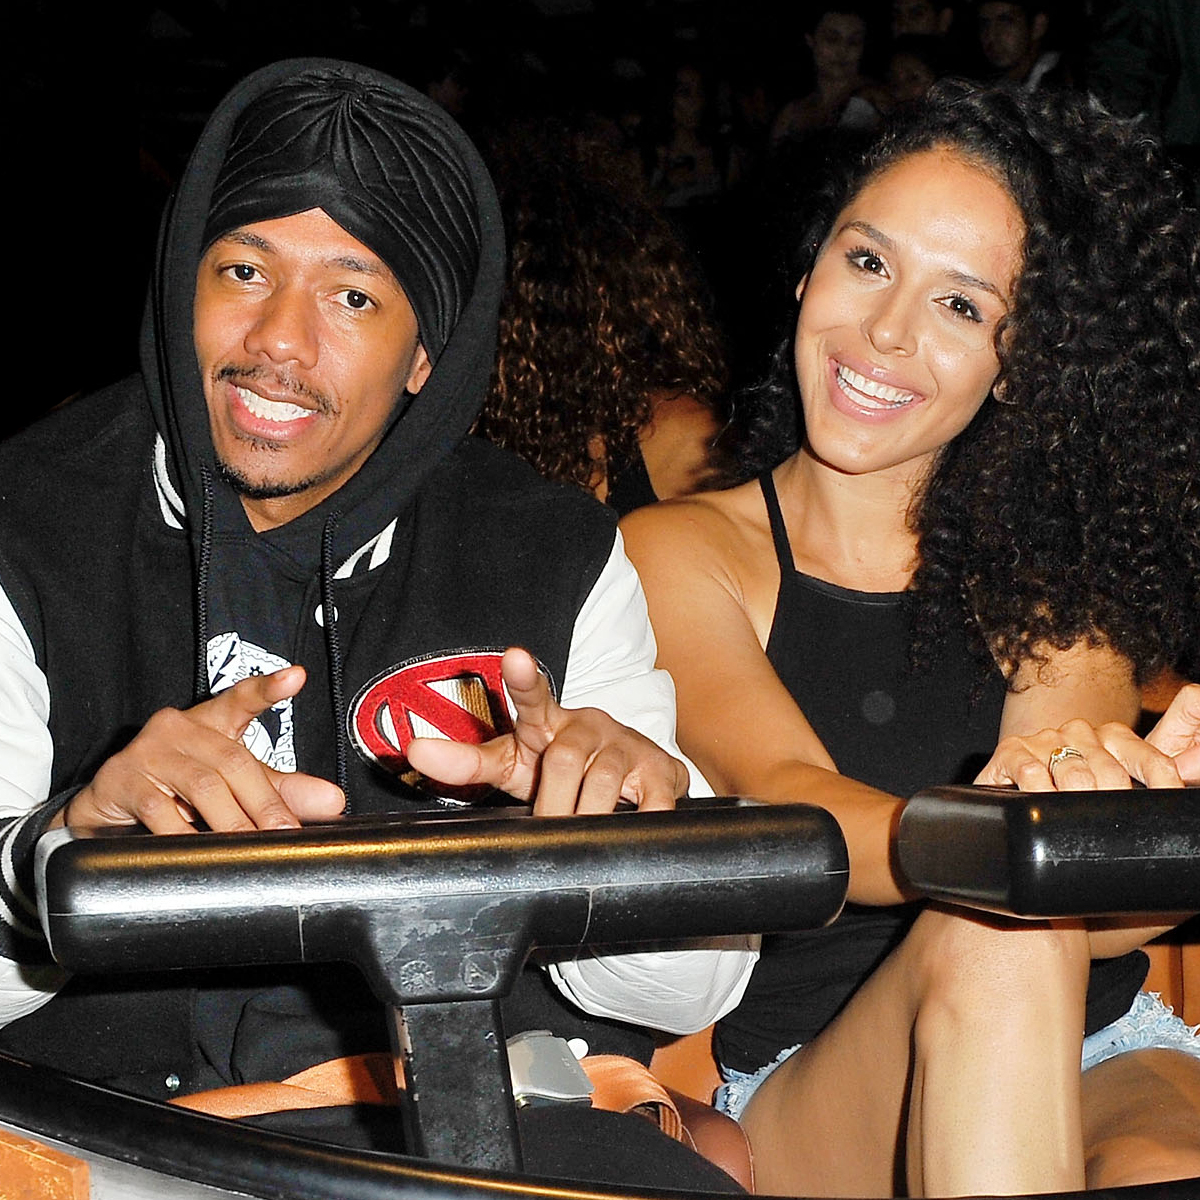 Nick Cannon welcomes his 10th child, his 3rd with Brittany Bell